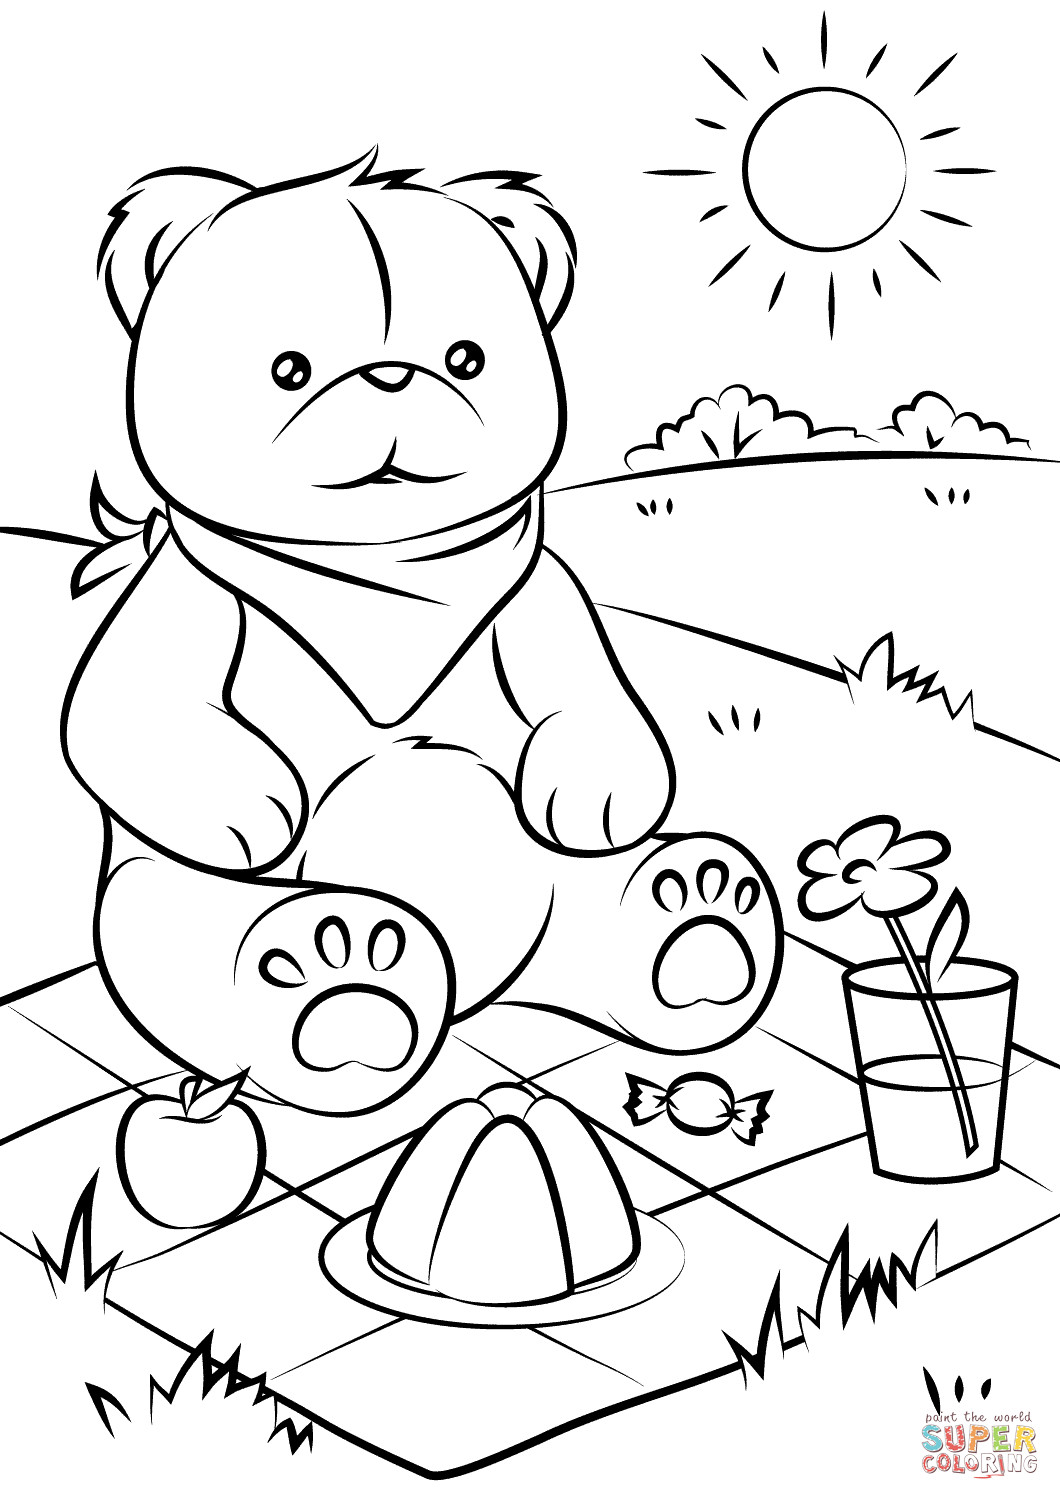 Baby Bear Coloring Pages at GetColorings.com | Free printable colorings